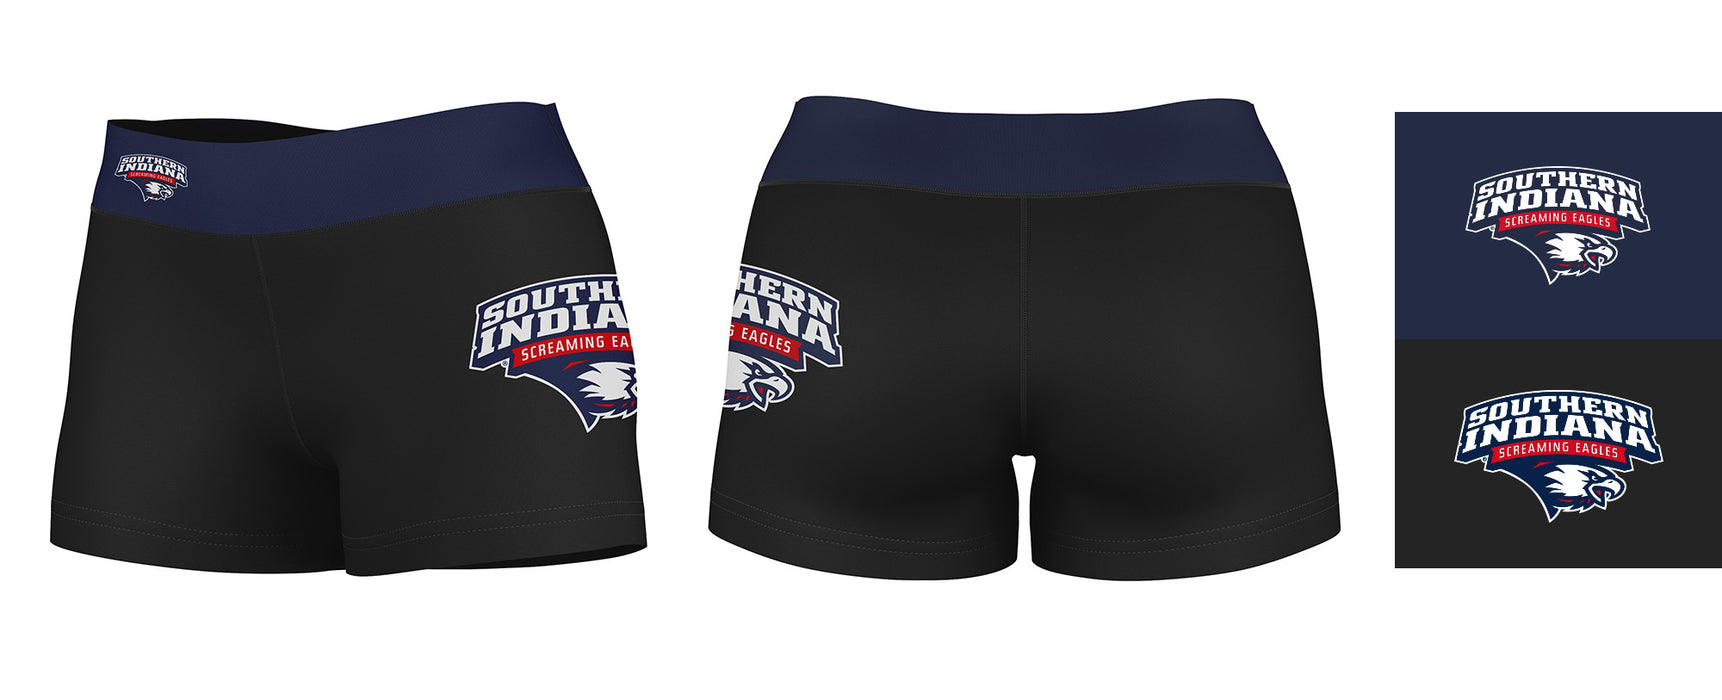 Southern Indiana Screaming Eagles Logo on Thigh & Waistband Black & Blue Women Yoga Booty Workout Shorts 3.75 Inseam" - Vive La Fête - Online Apparel Store